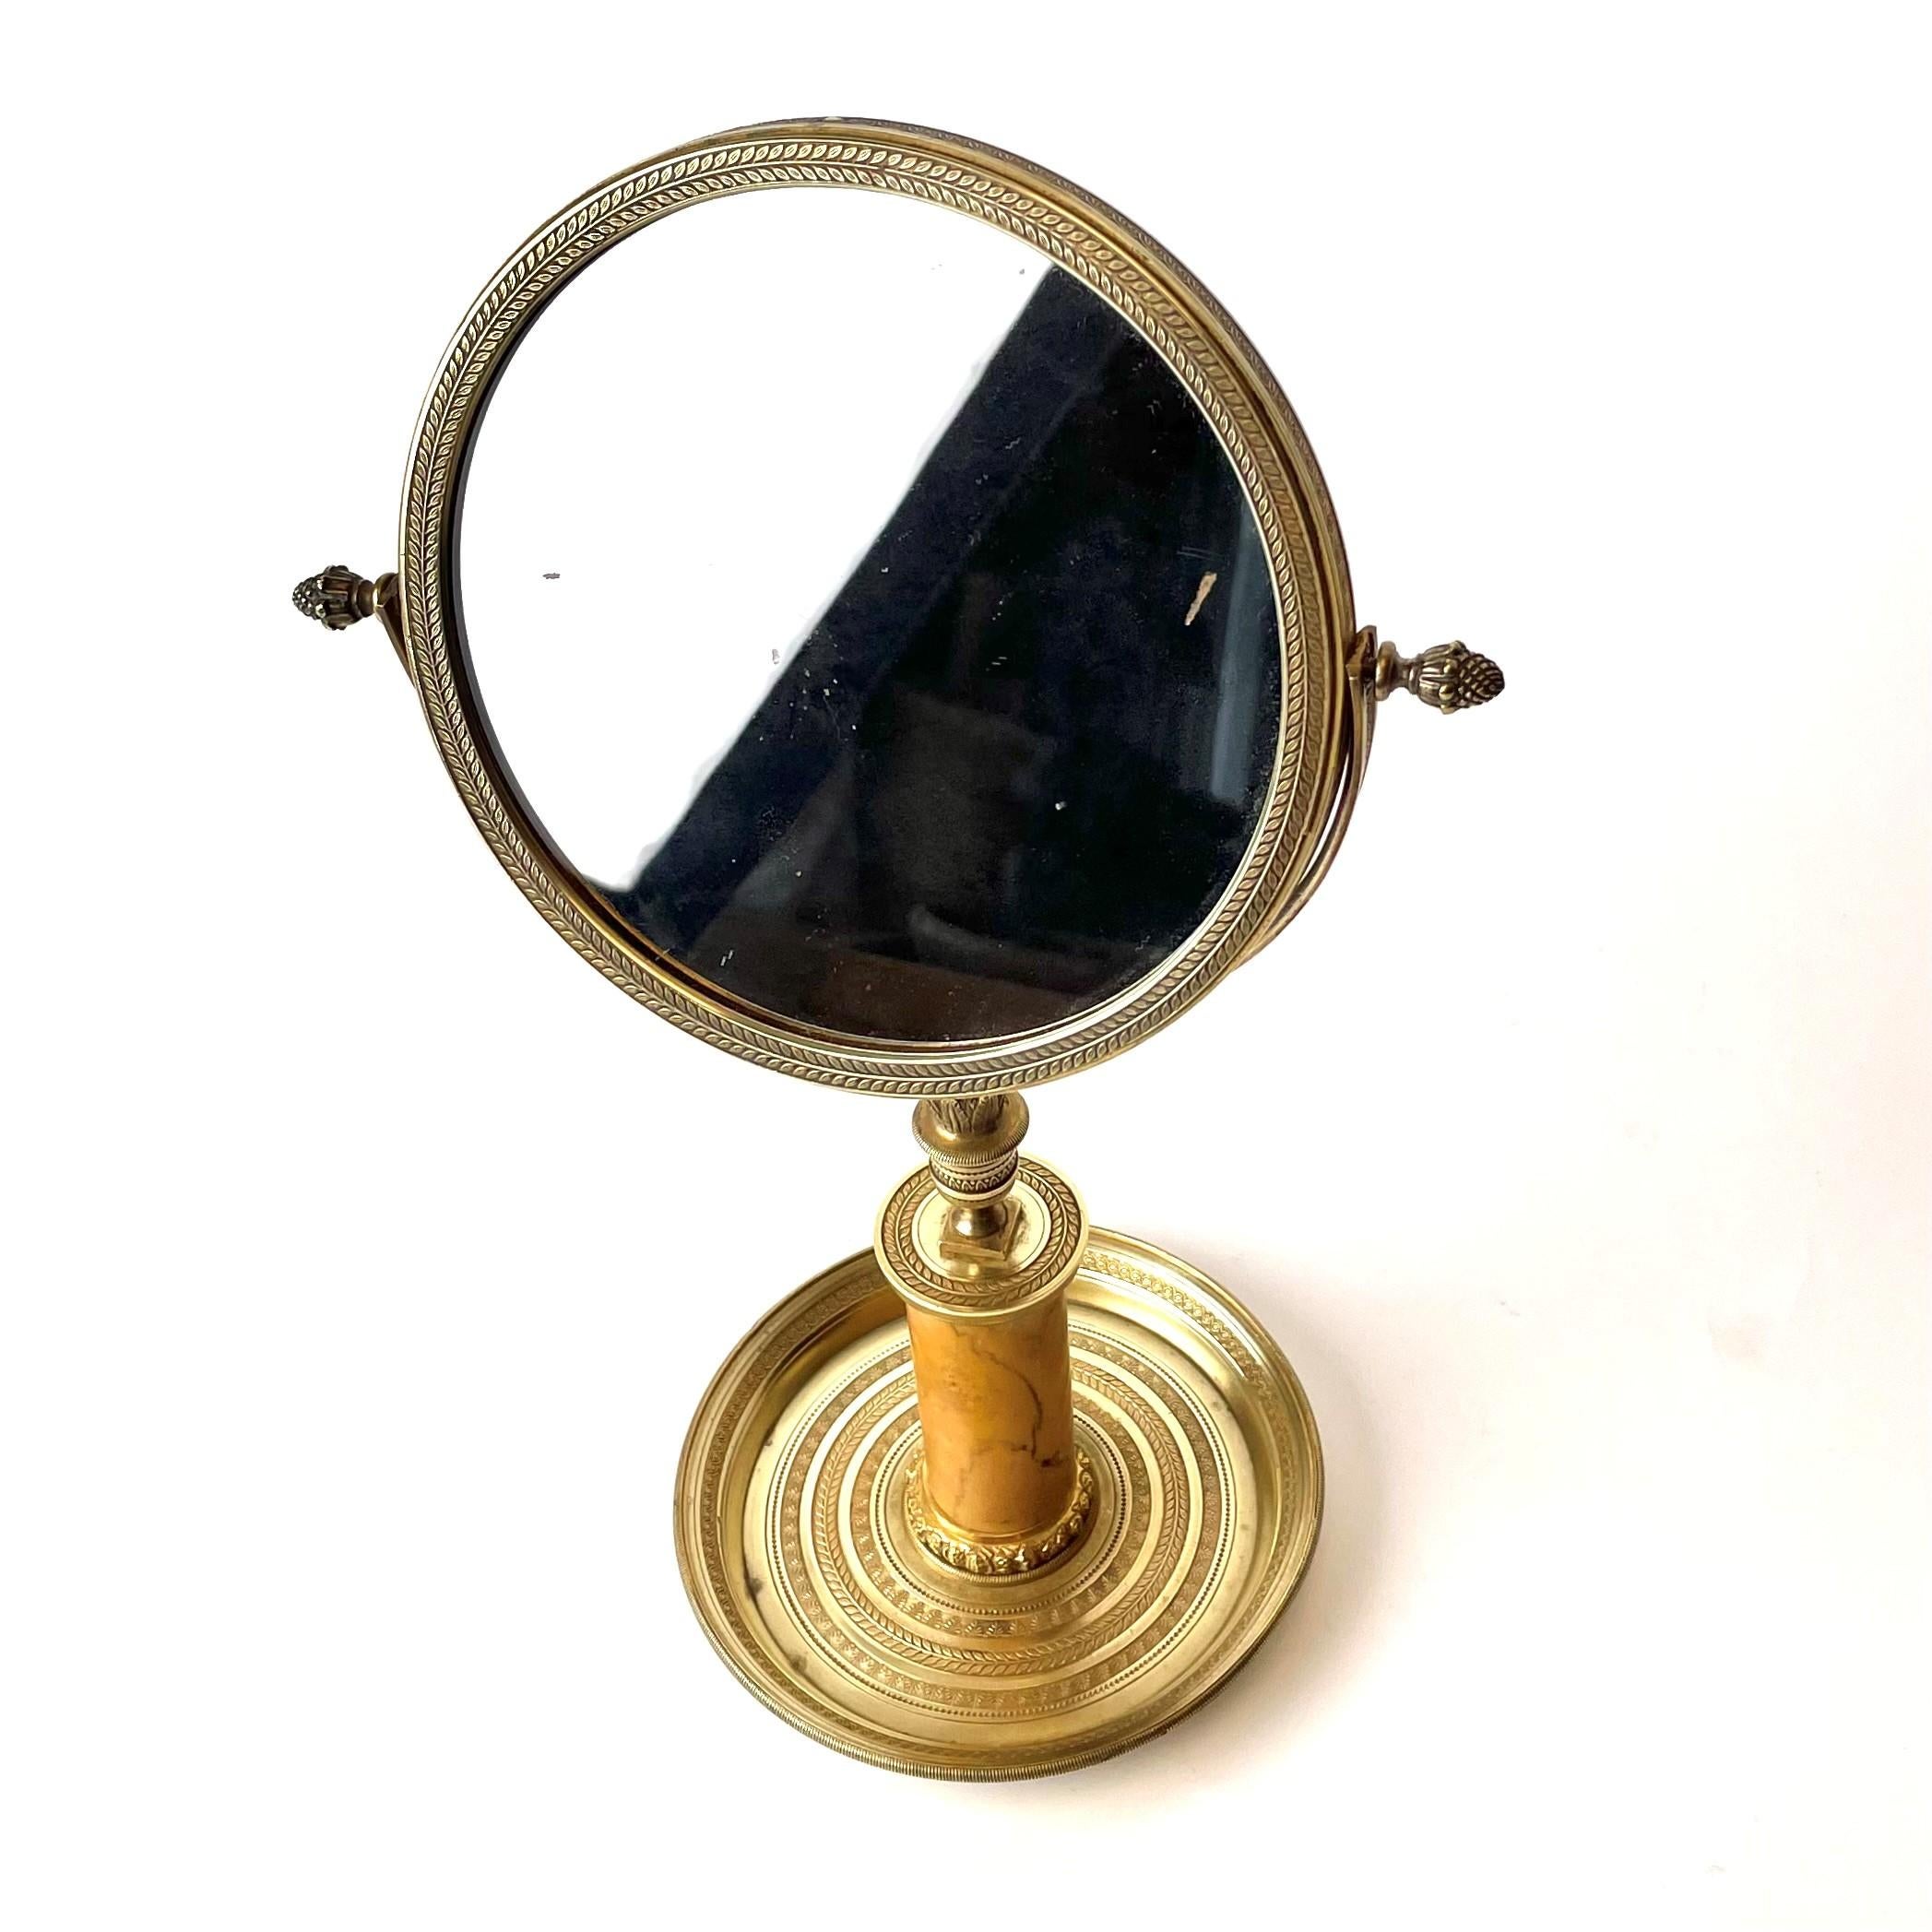 Beautiful French table mirror in bronze and marble, Louis Philippe, circa 1830s. 

The mirror is of high quality and with old mirror glass on both sides.

Wear consistent with age and use.